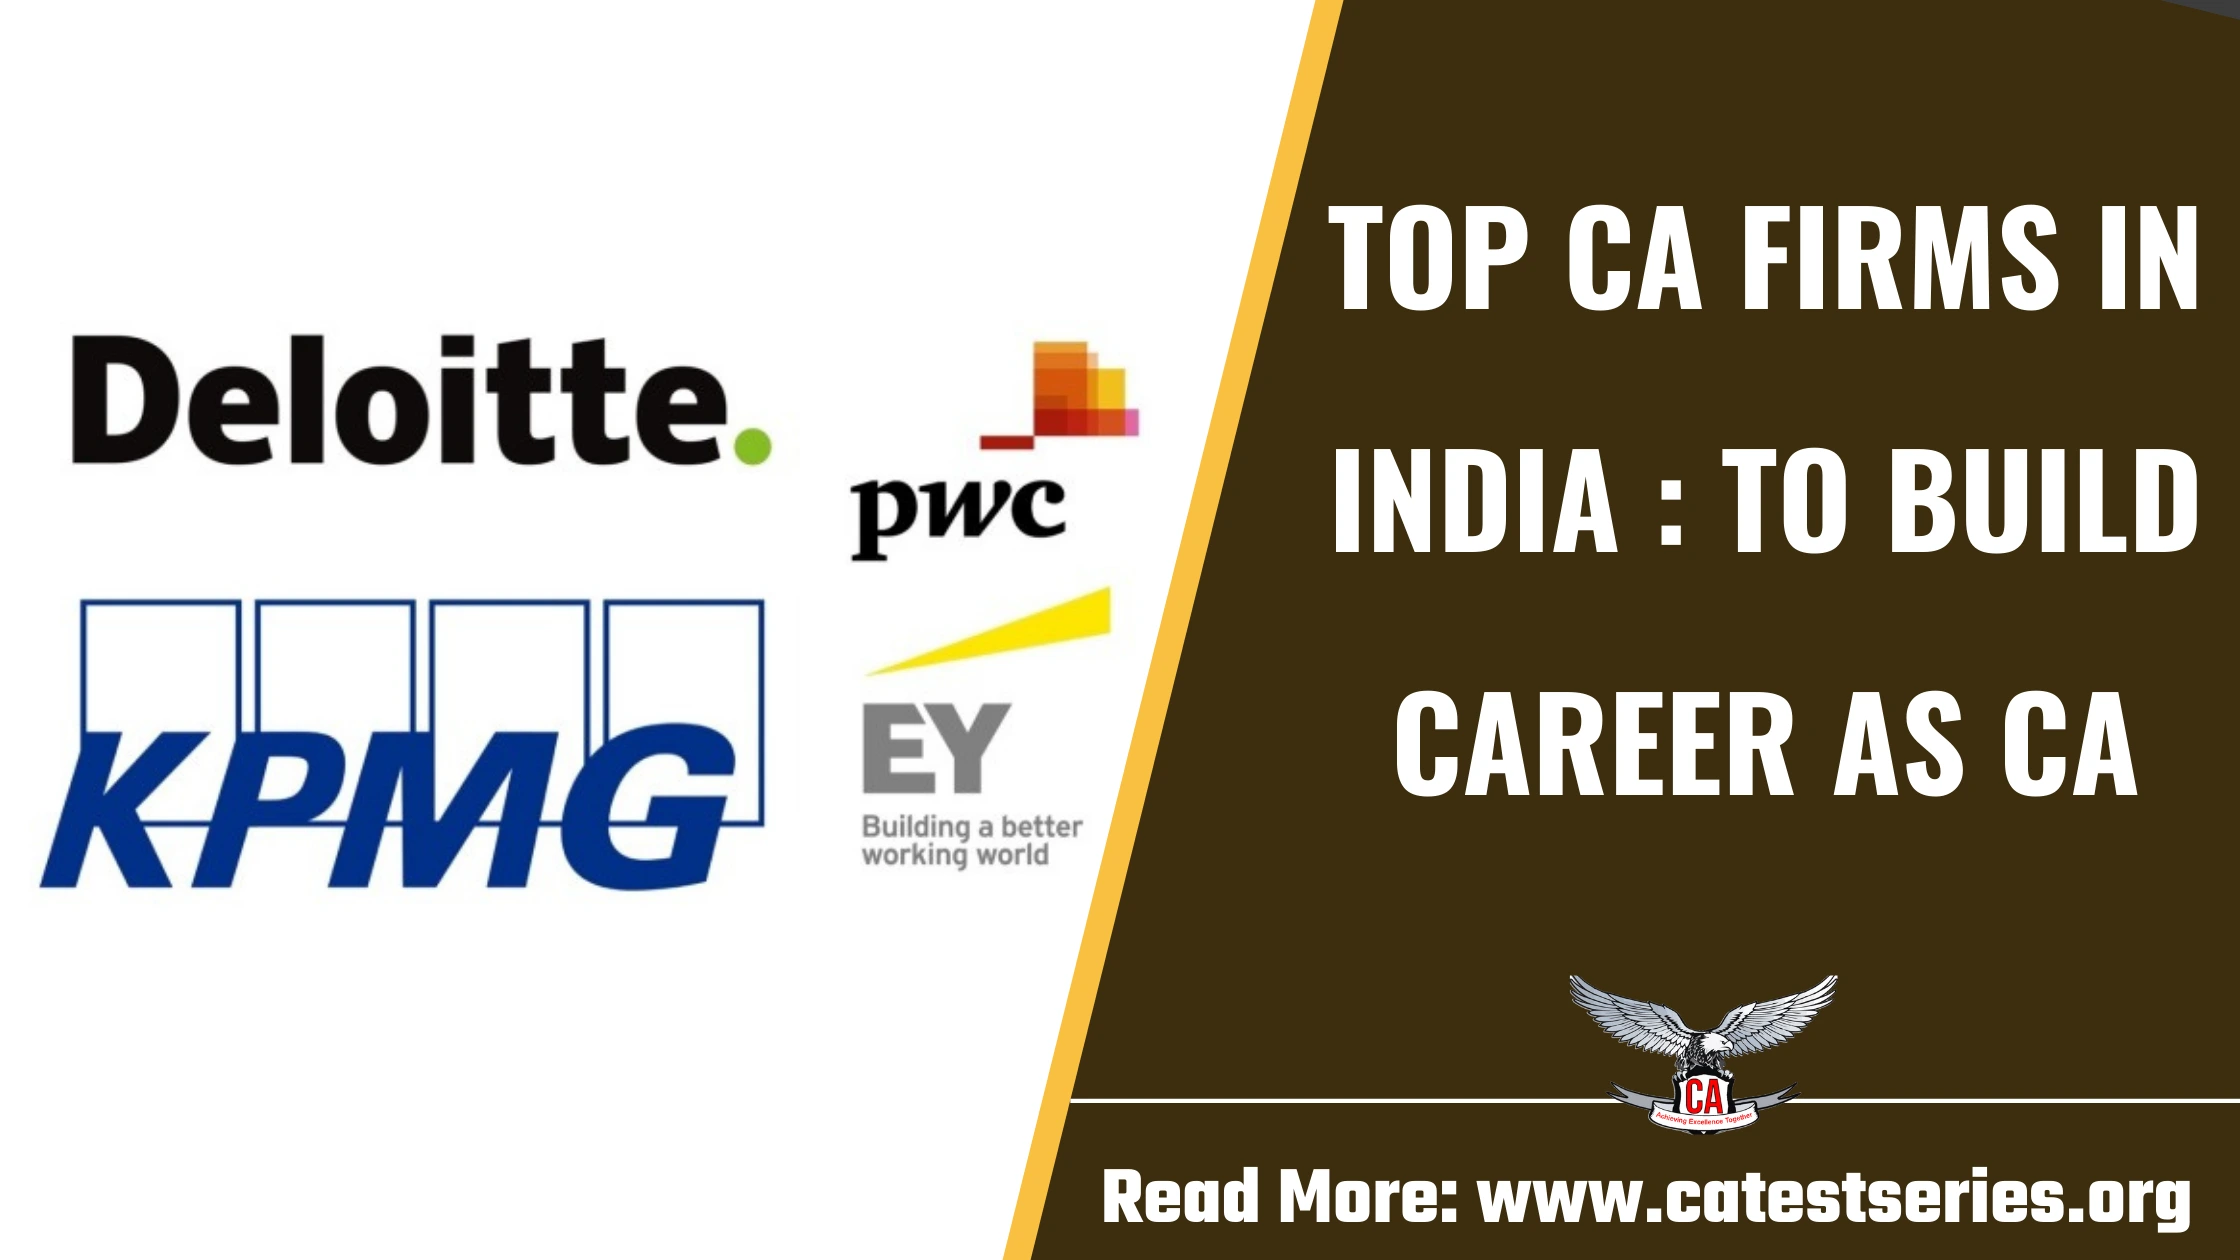 Top 10 CA Firms In India – Build Your Career As A Chartered Accountant